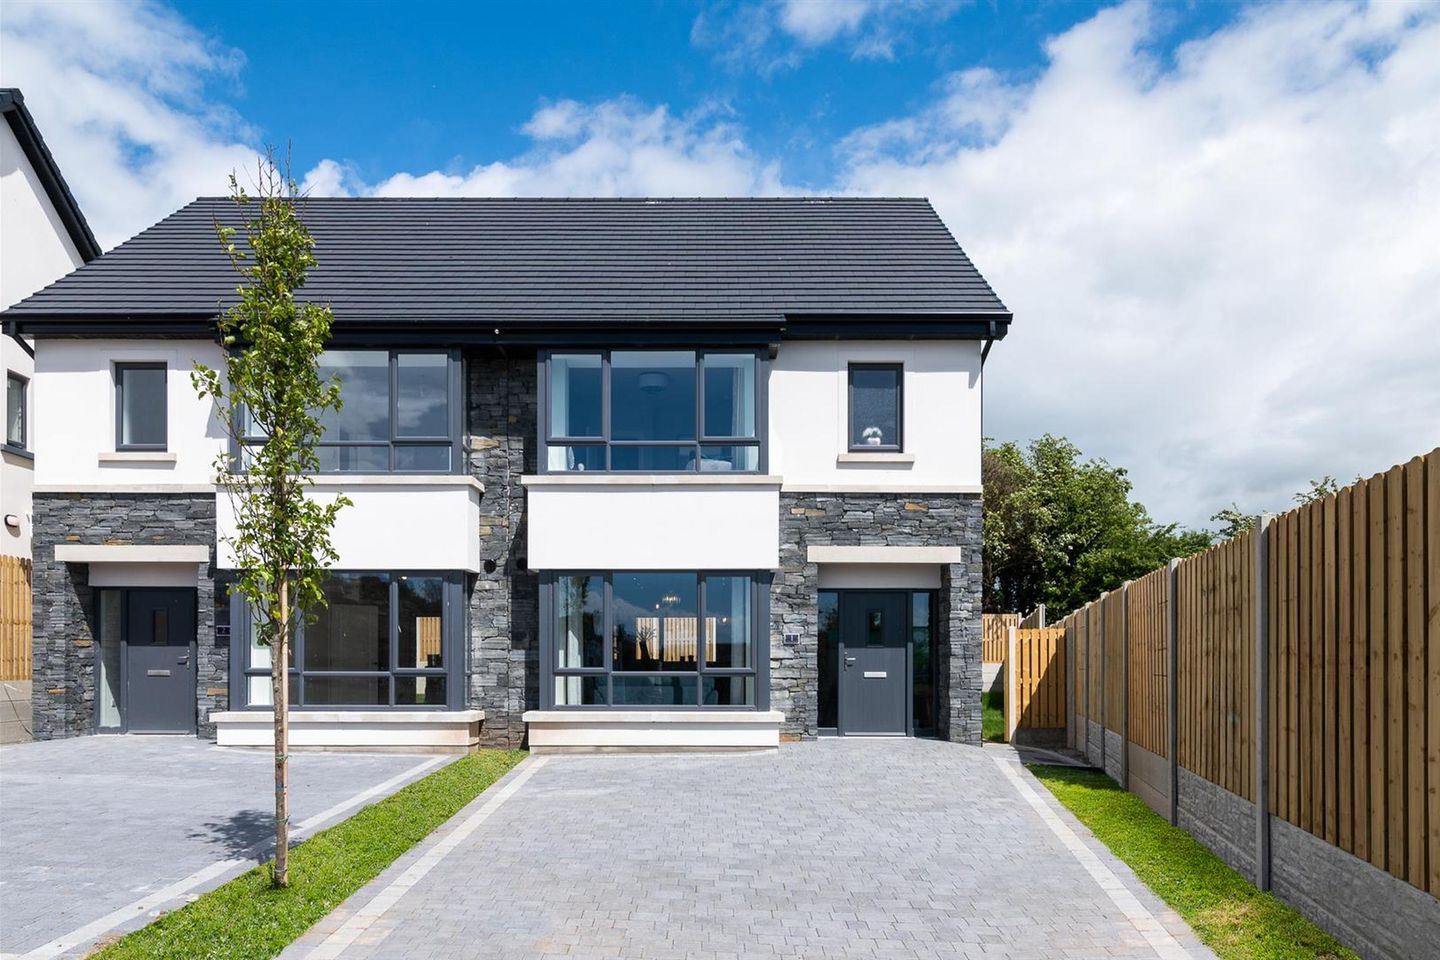 House Type A : 3 Bedroomed Semi Detached, Converti, CAIRNHILL MEADOWS, CAIRNHILL MEADOWS, Naas Road, Kilcullen, Co. Kildare